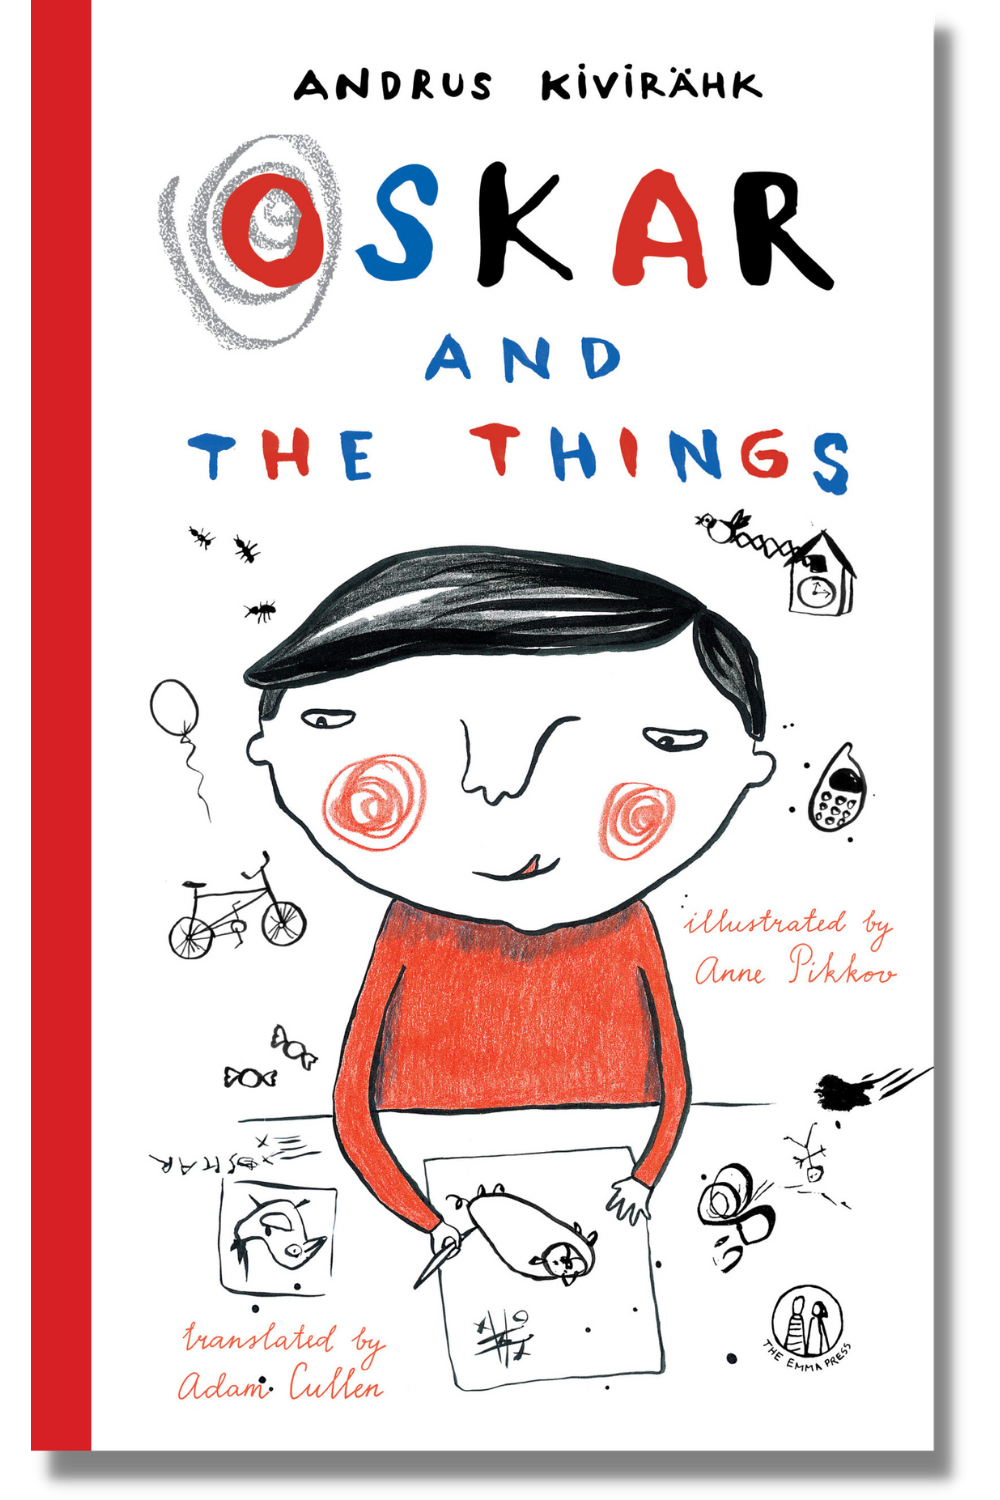 The cover of "Oskar and the Things"